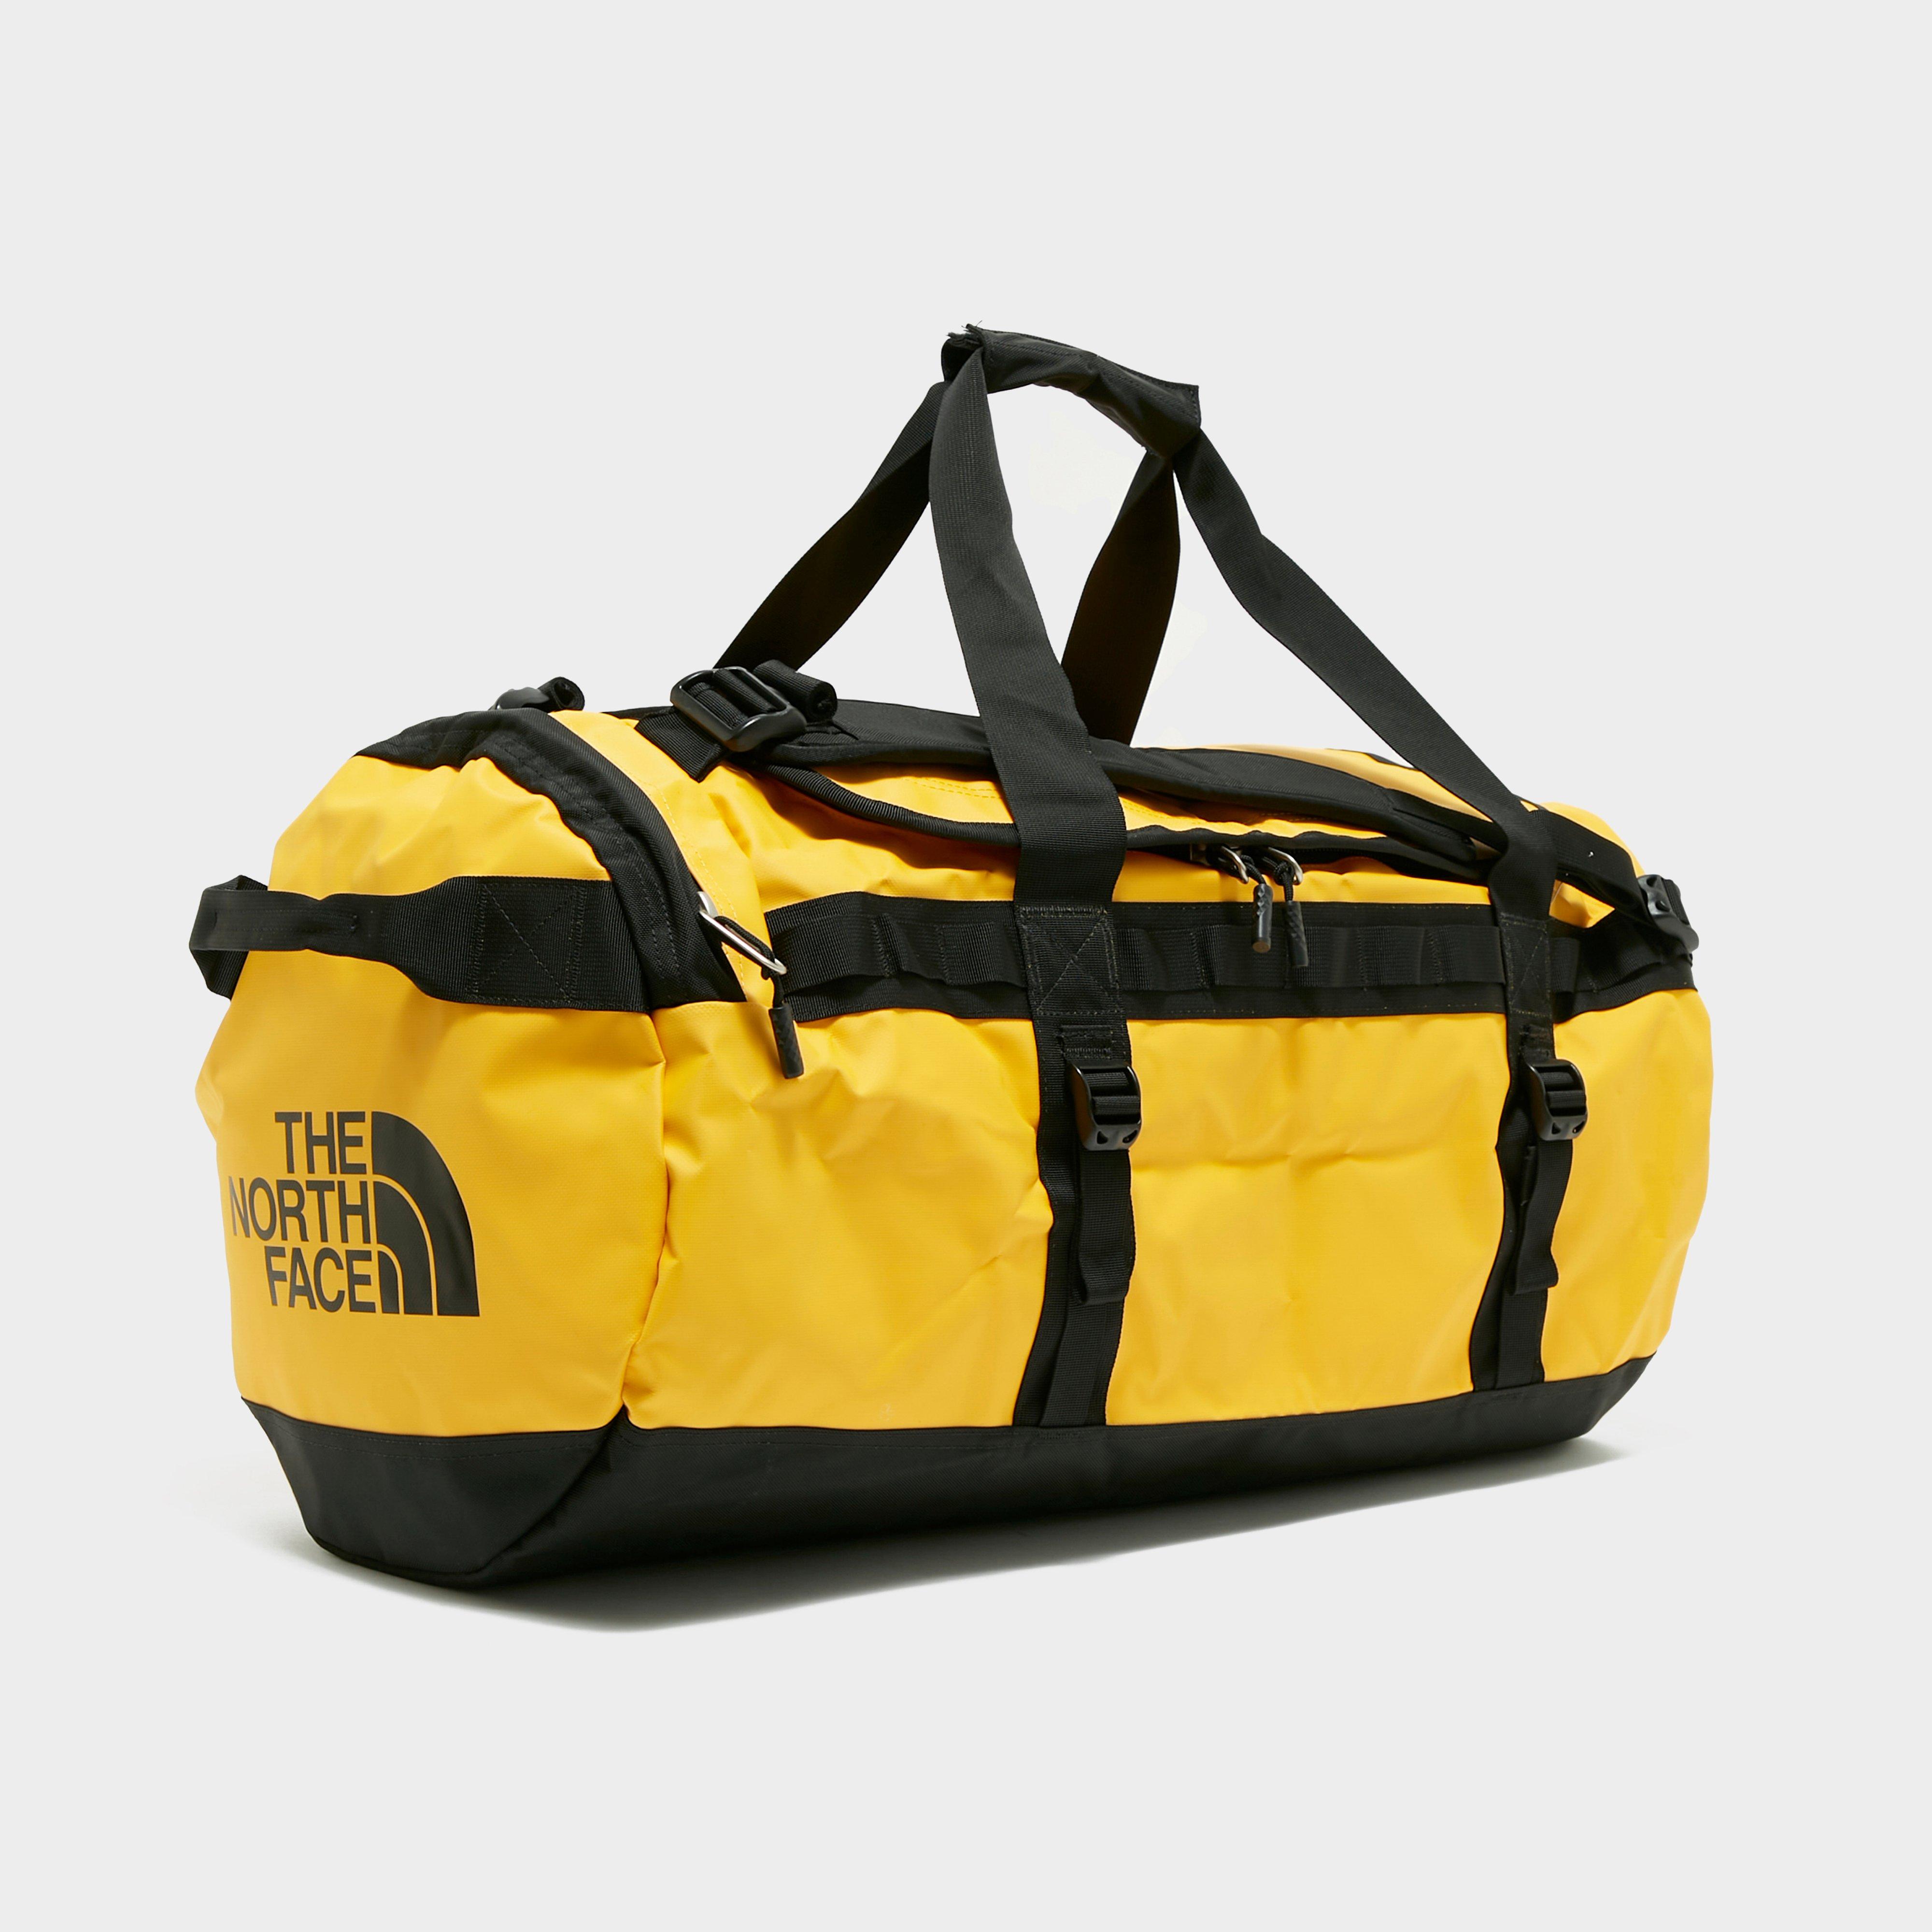 The North Face The North Face Basecamp Duffel Bag (Medium) - Yellow, YELLOW